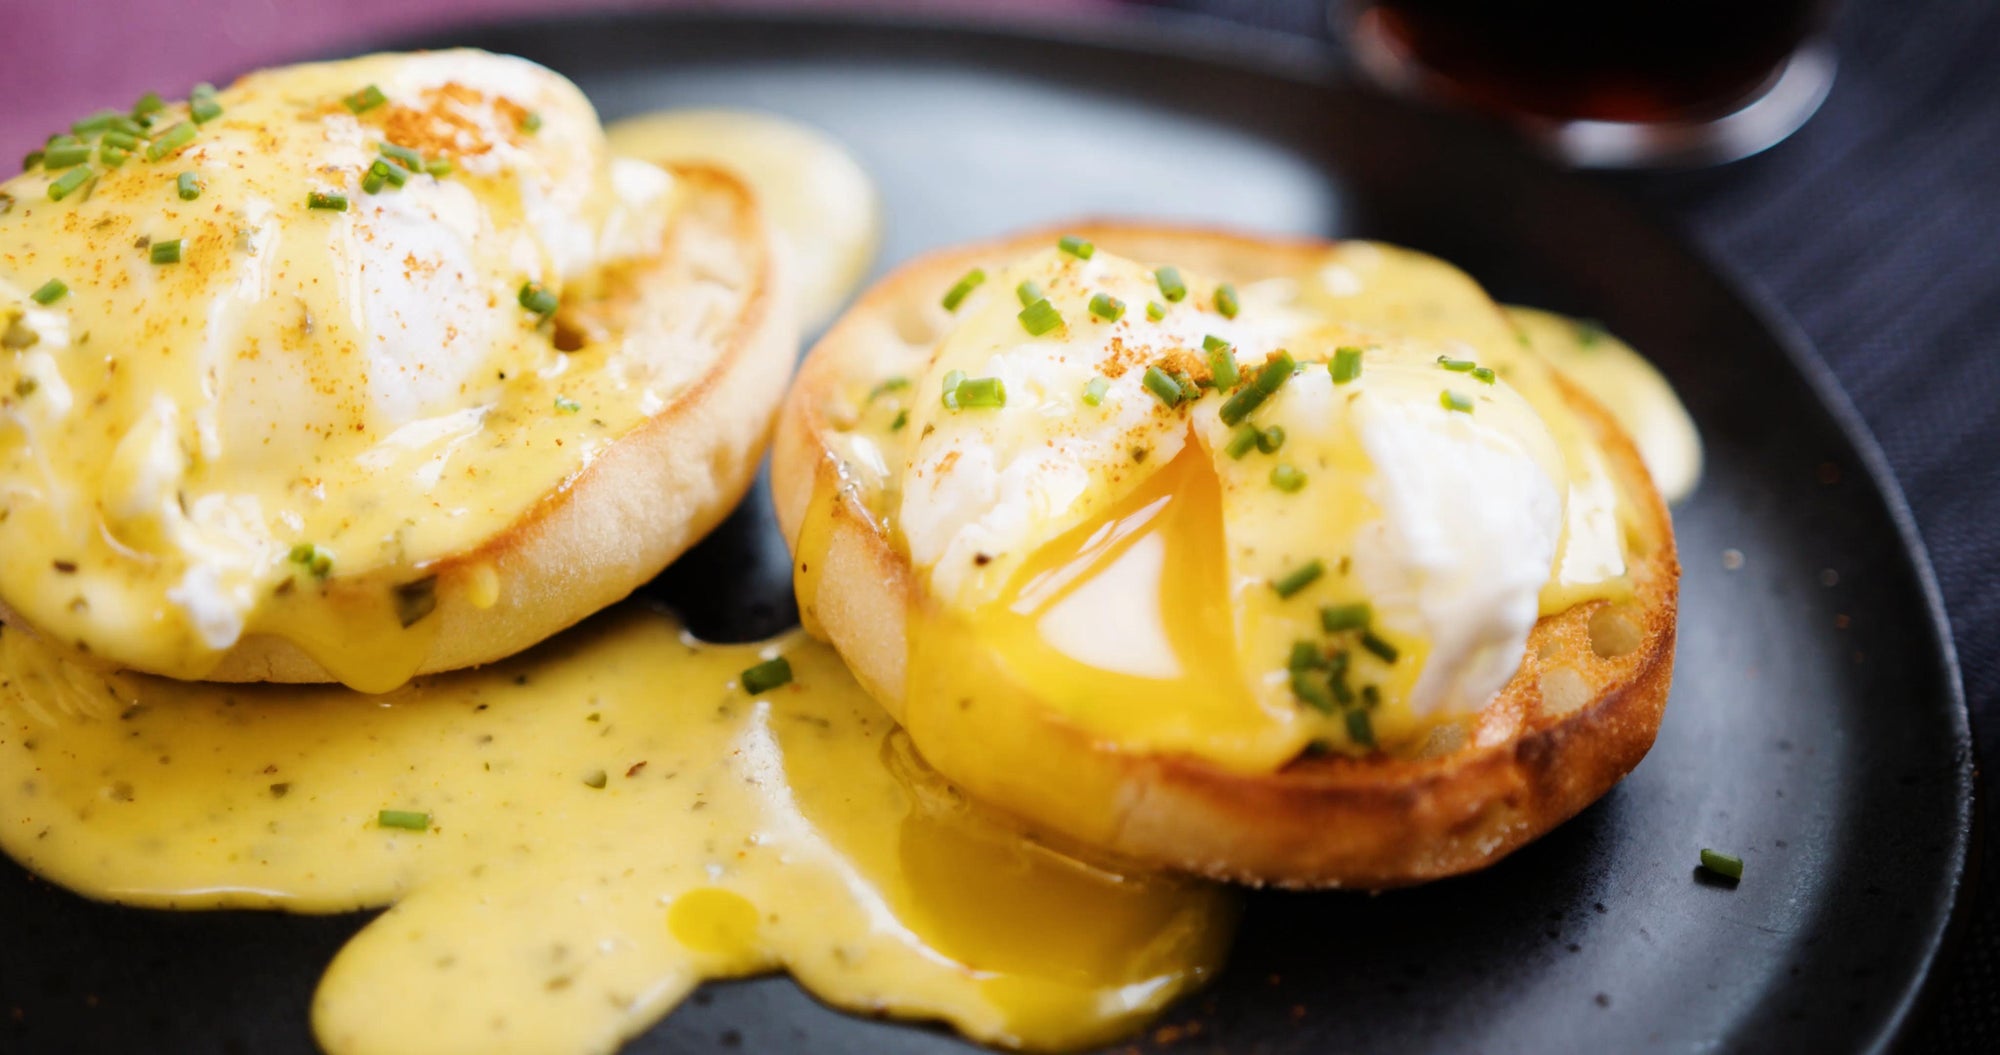 Two-ingredient hollandaise sauce made with Epicurean Butter Lemon Garlic Herb Flavored Butter